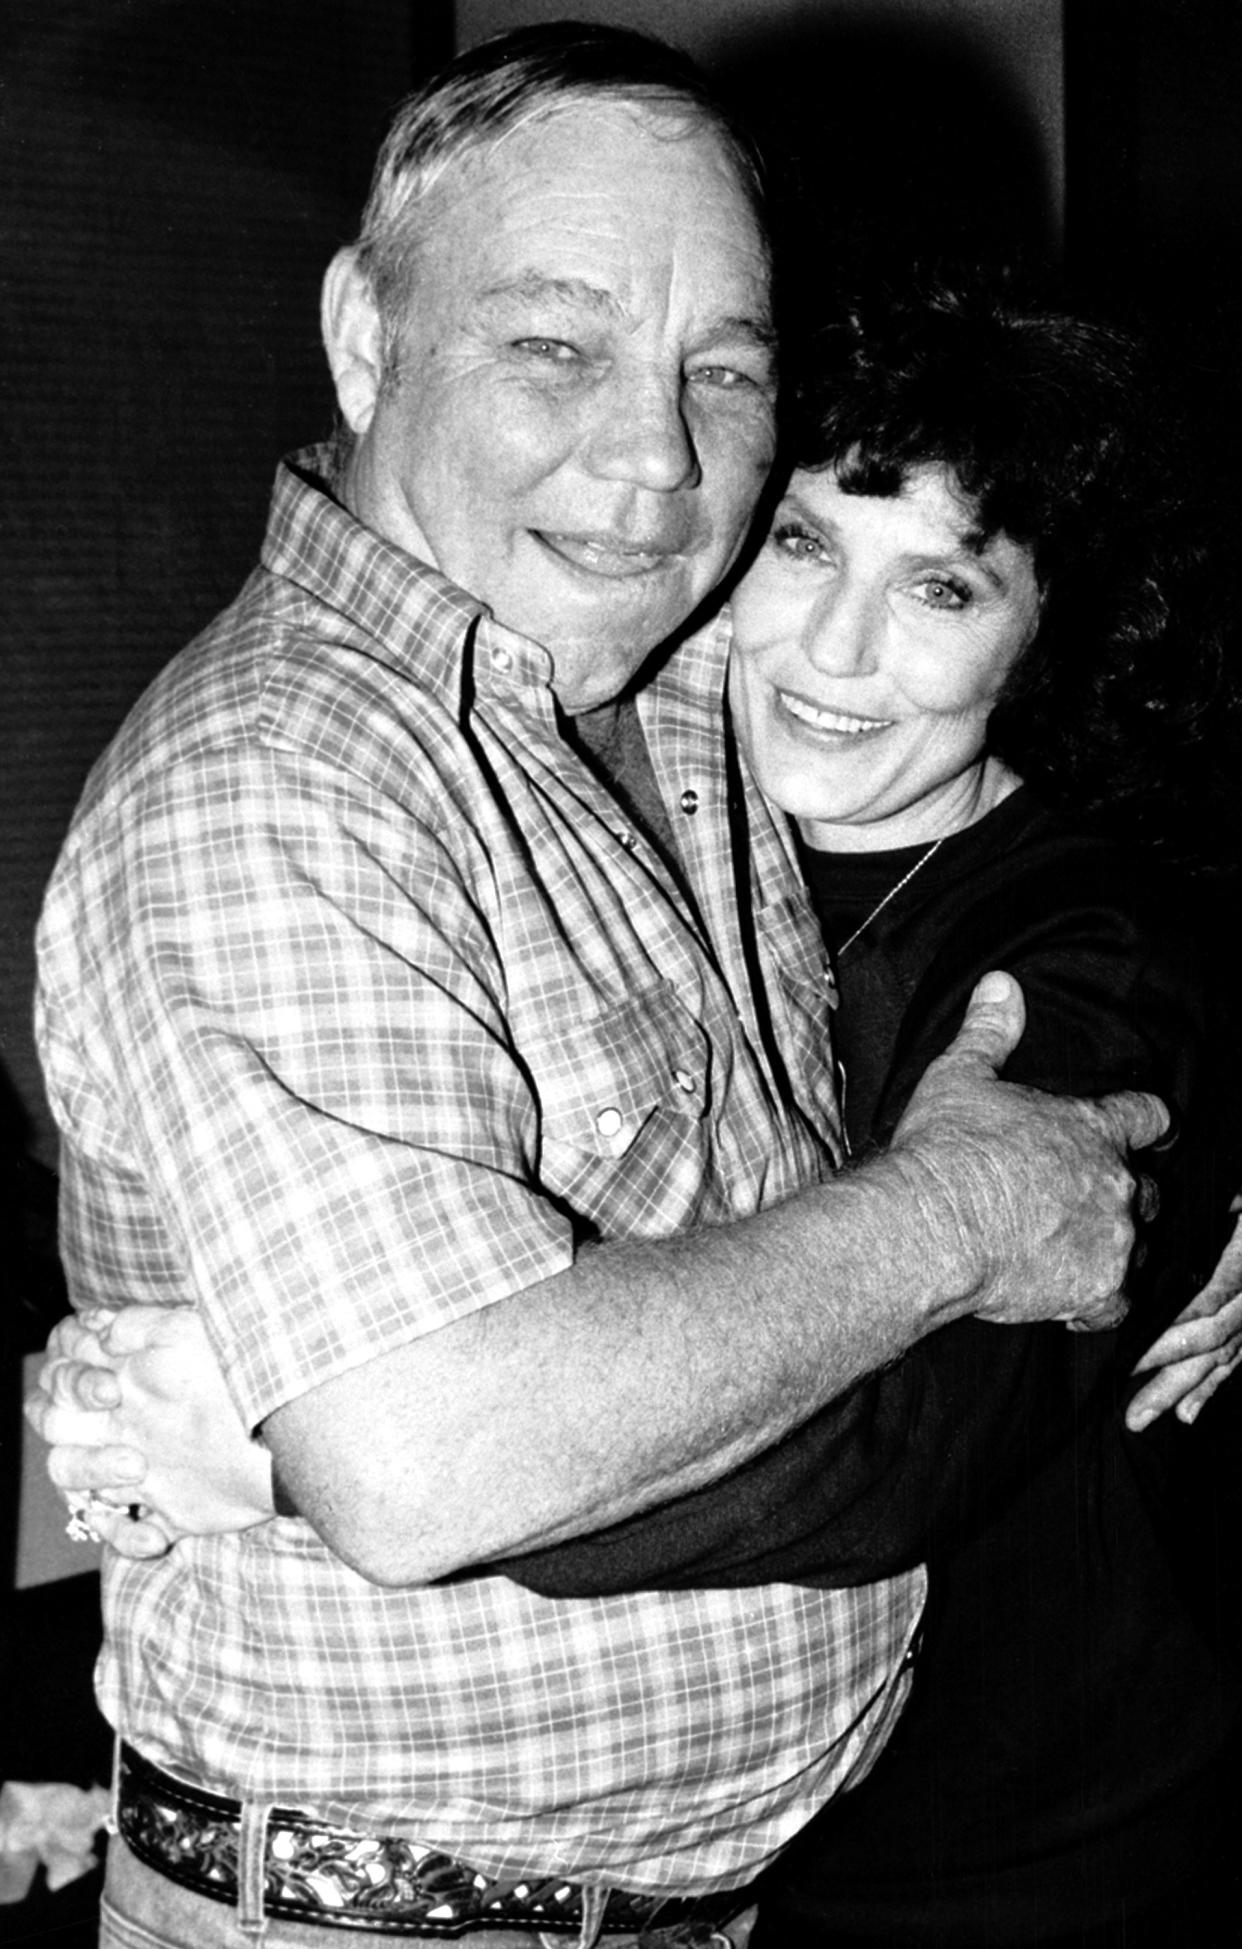 FILE - Country music singer Loretta Lynn embraces her husband, Oliver "Mooney" Lynn, during rehearsal for her New York debut, on Oct. 21, 1982. Lynn, the Kentucky coal miner’s daughter who became a pillar of country music, died Tuesday at her home in Hurricane Mills, Tenn. She was 90. (AP Photo/Antonio Carozza, File)